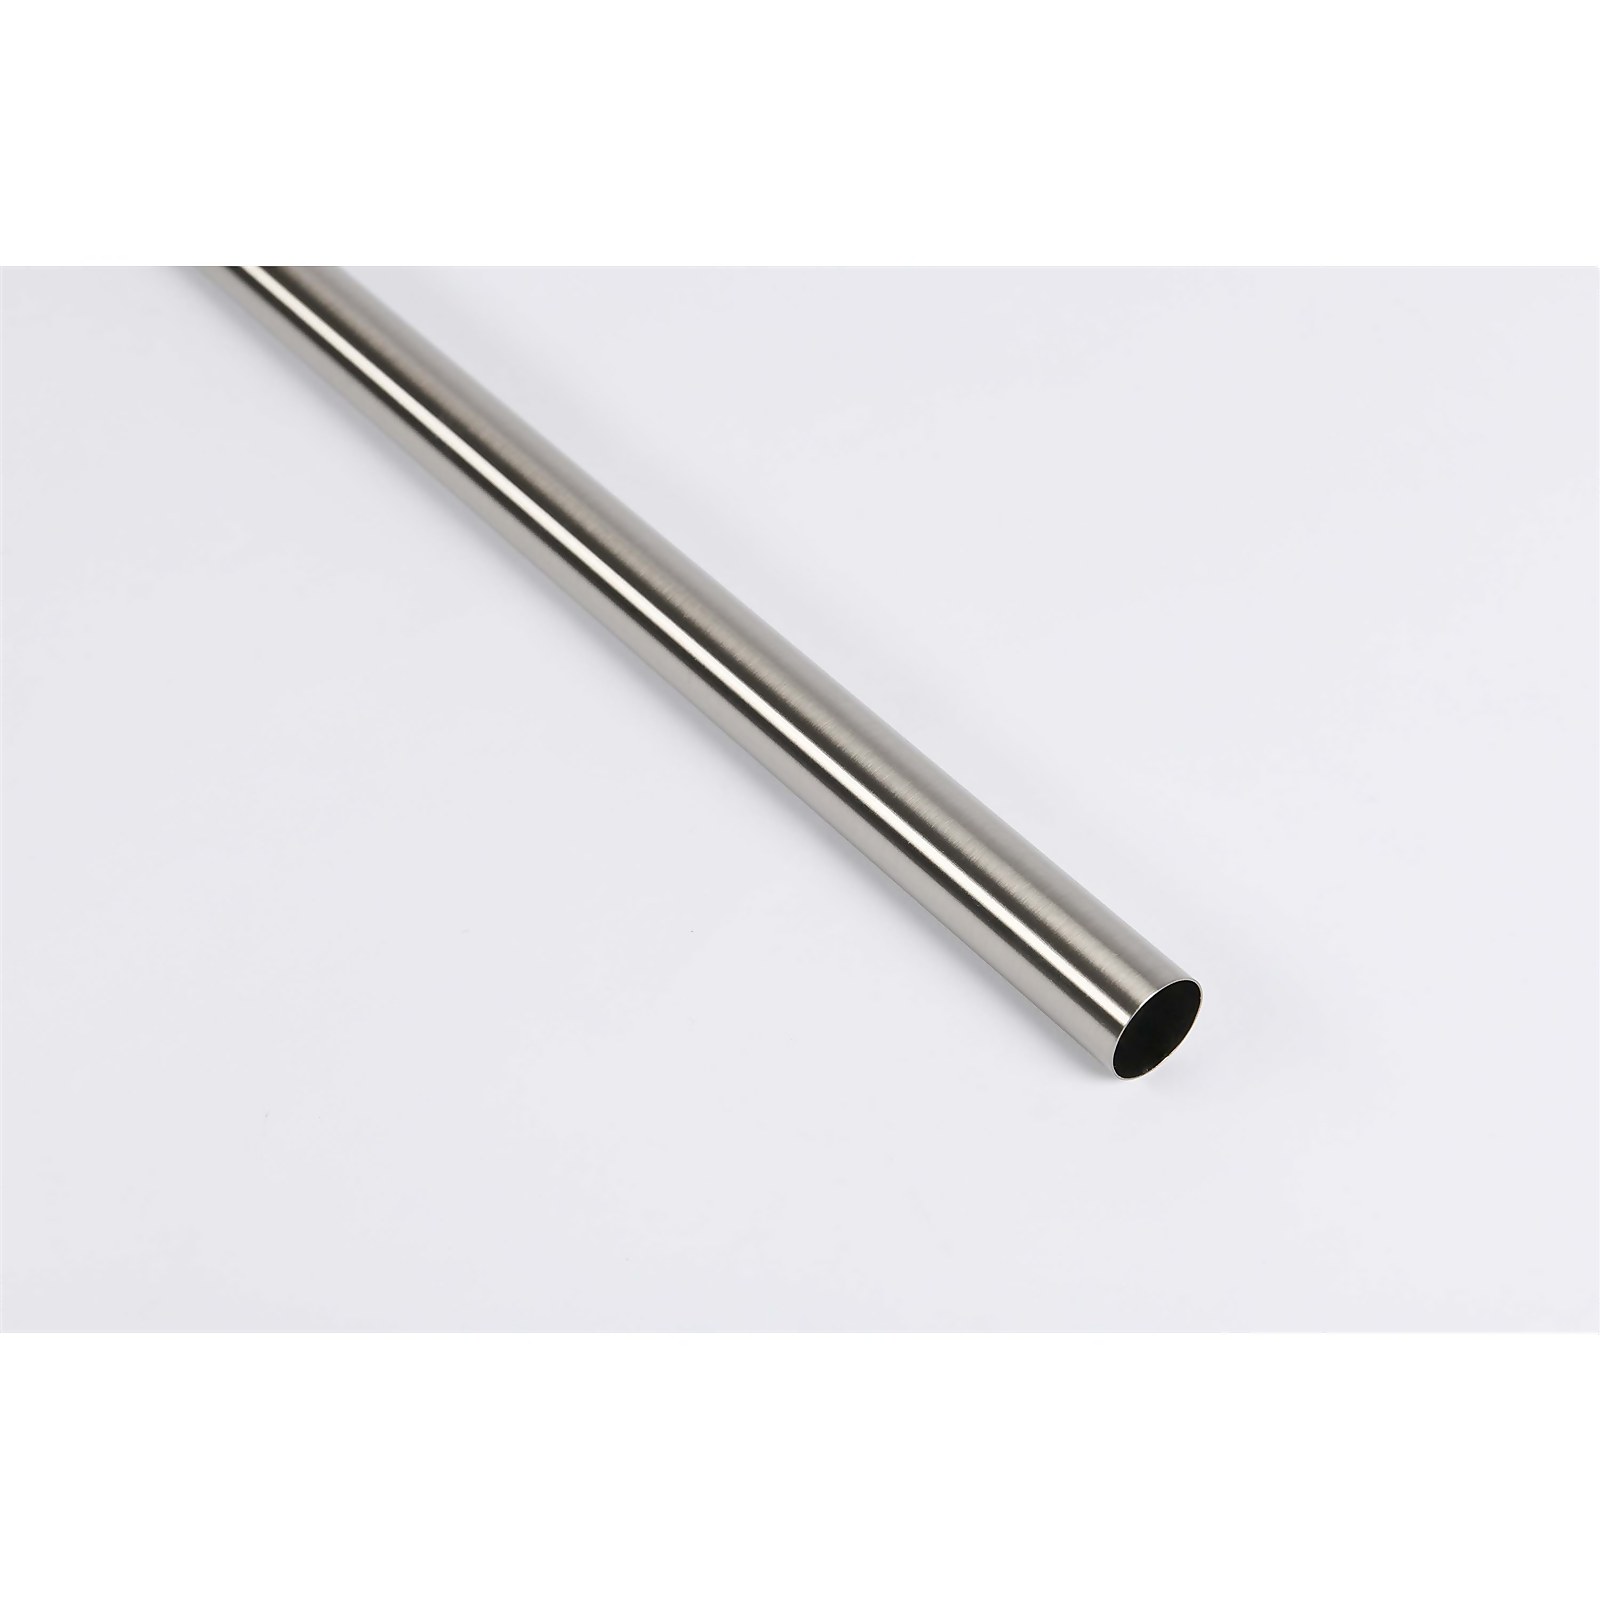 Photo of Brushed Stainless Steel Tube - 2.4m